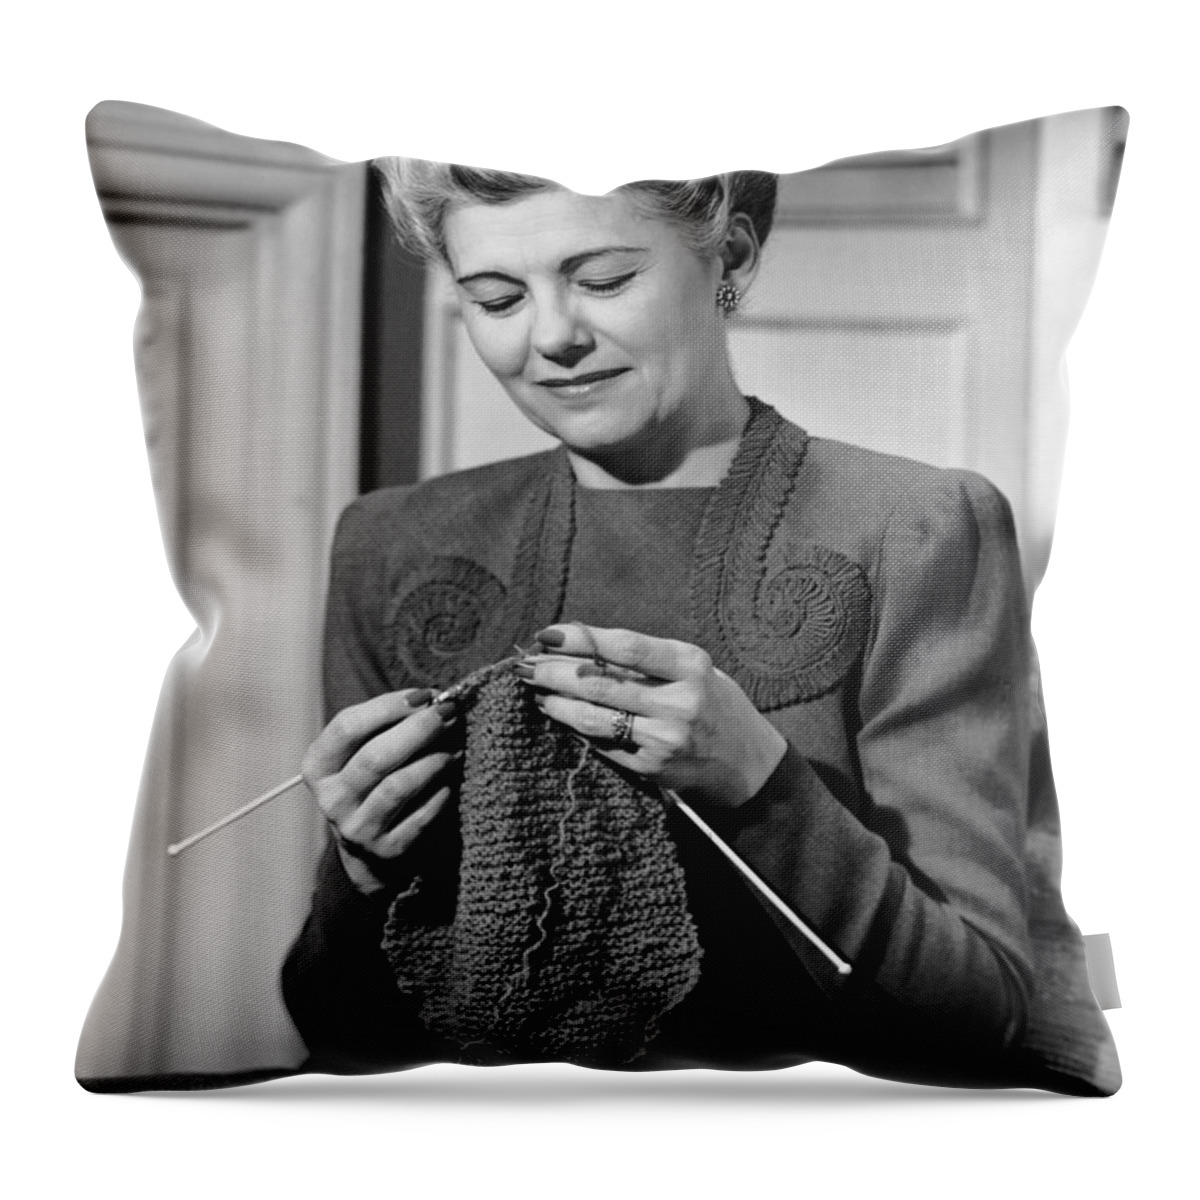 Mature Adult Throw Pillow featuring the photograph Portrait Of Mature Woman Crocheting by George Marks